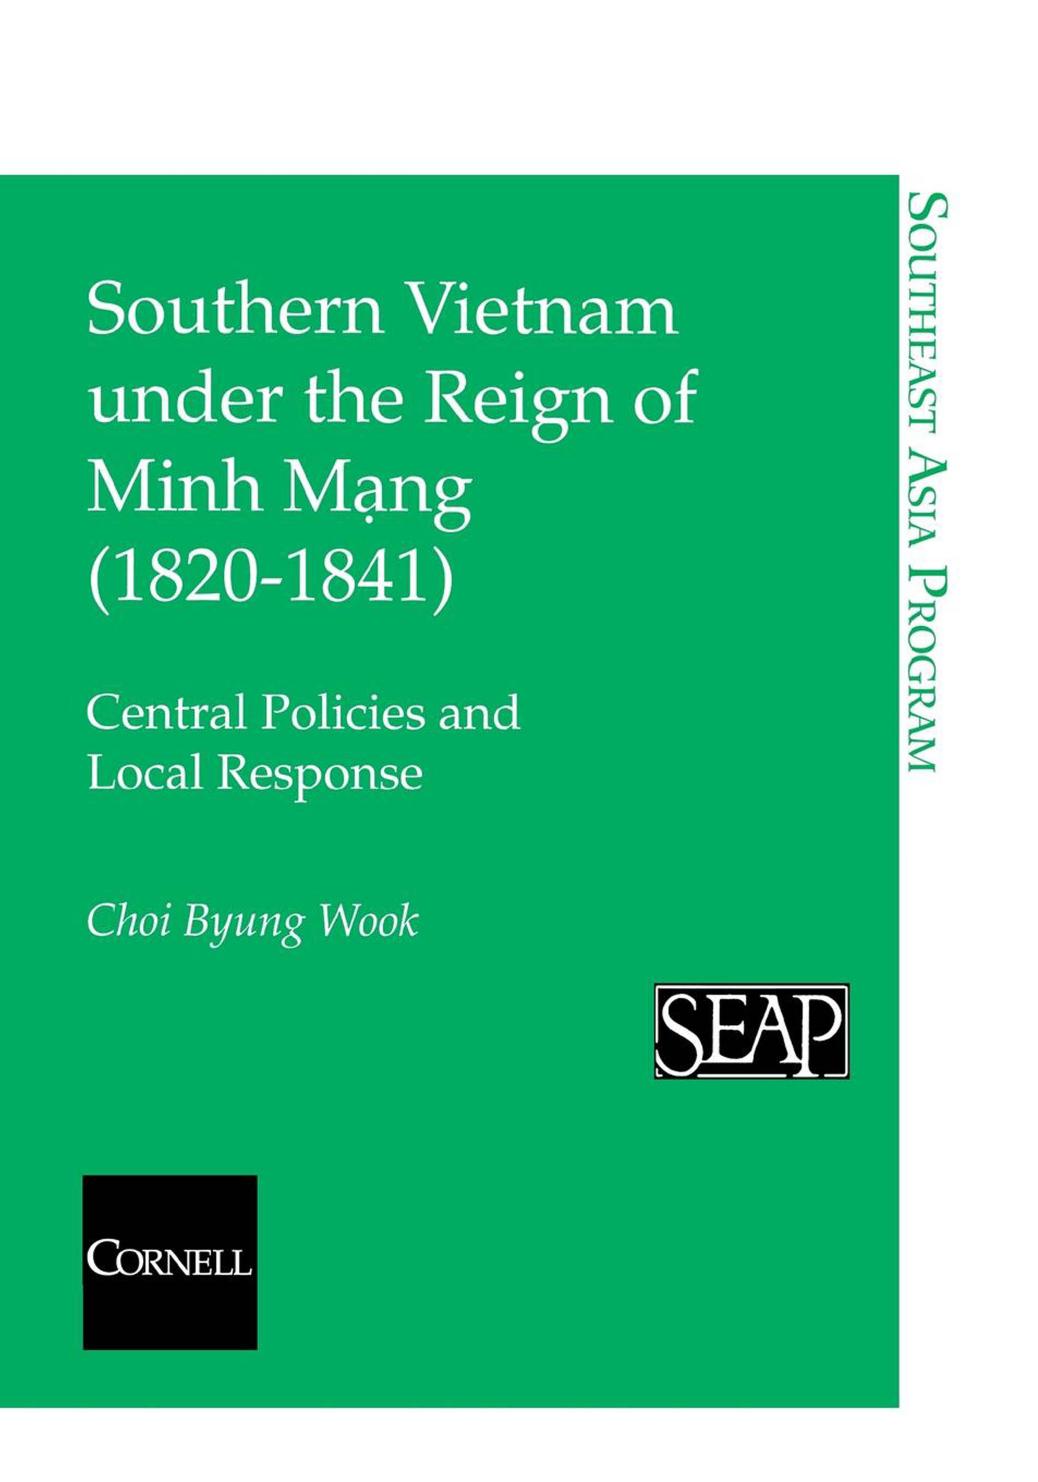 Southern Vietnam under the Reign of Minh Mang (1820â1841): Central Policies and Local Response by Choi Byung Wook